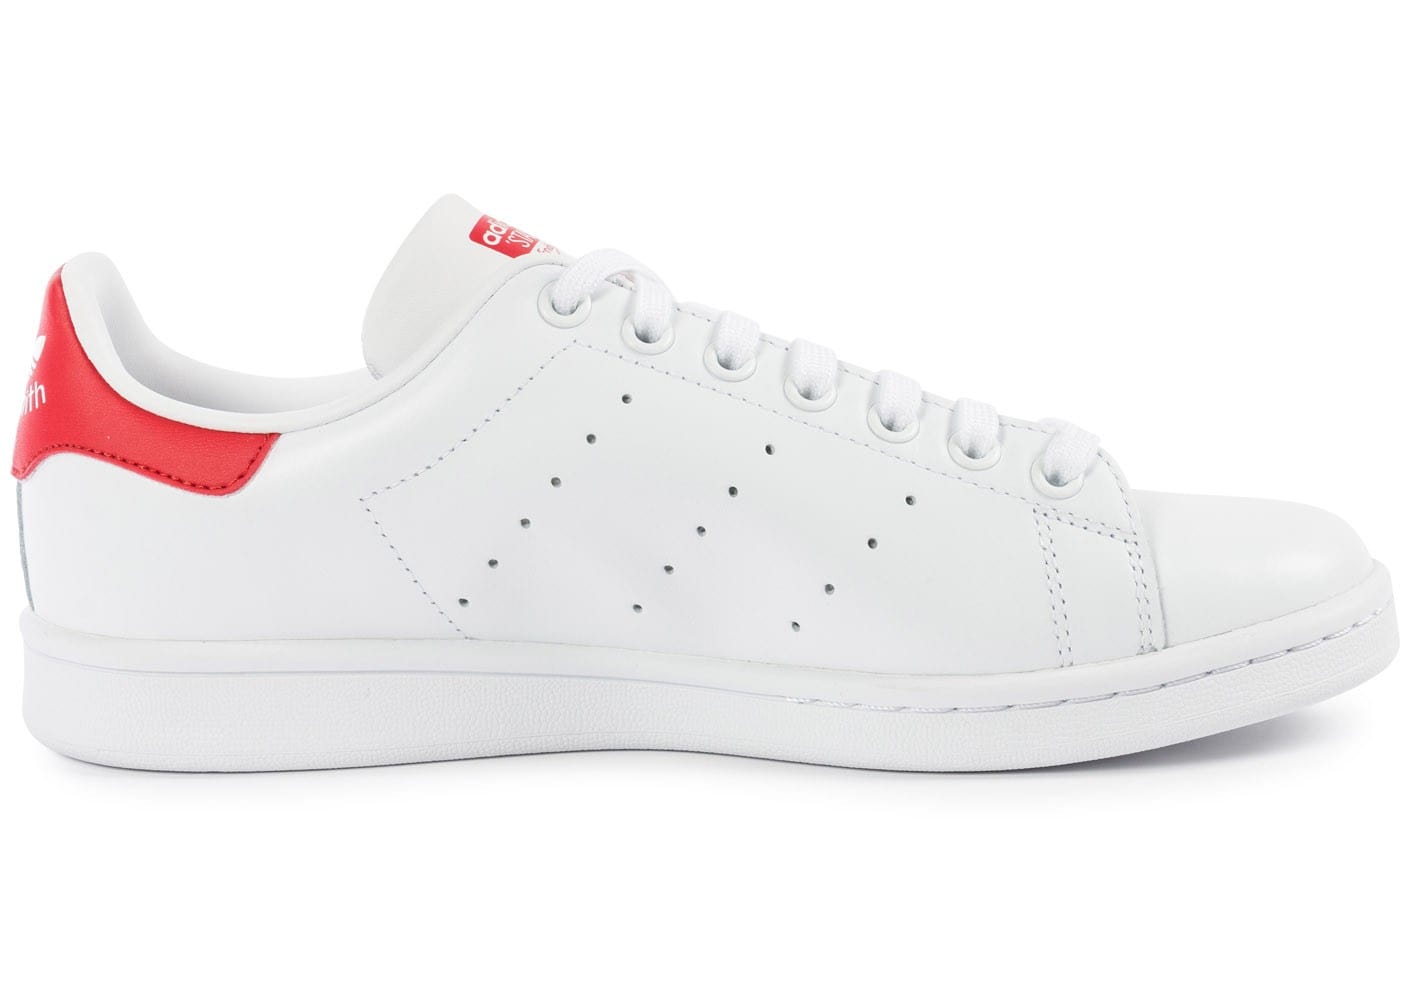 adidas stan smith blanche rouge